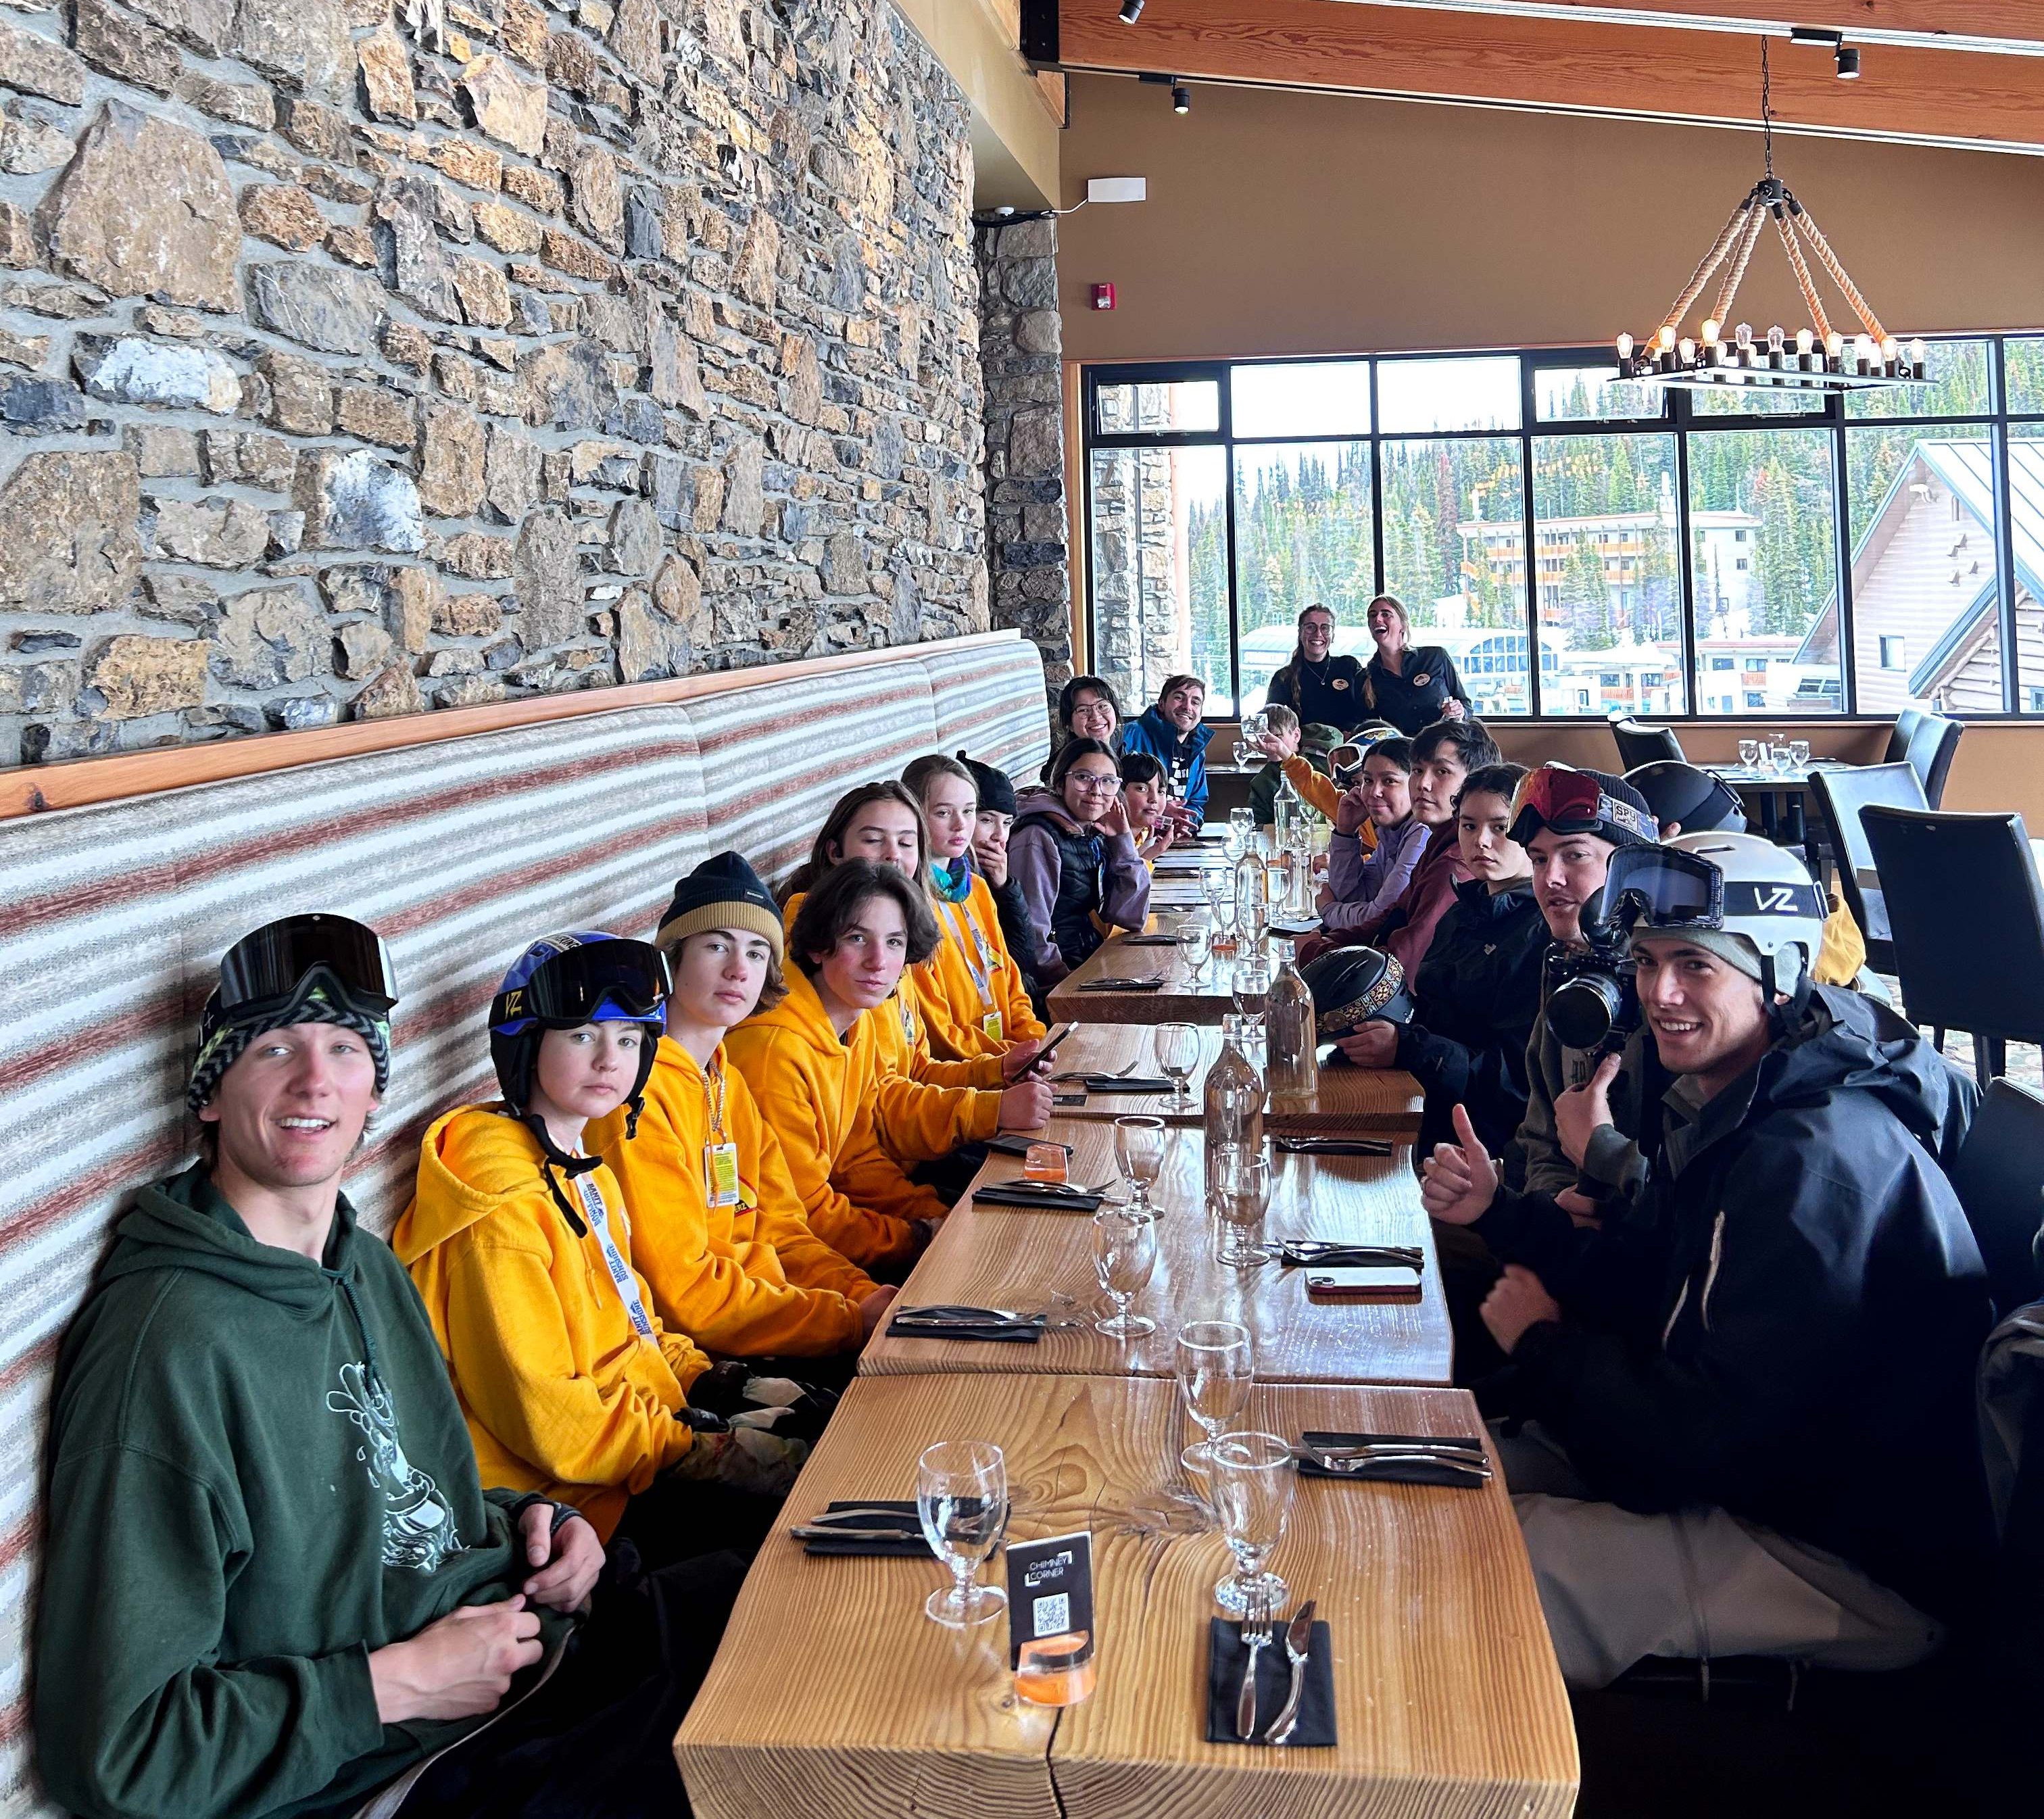 Liam Gill and a group of young Indigenous snowboarders eat at a long table in a restaurant